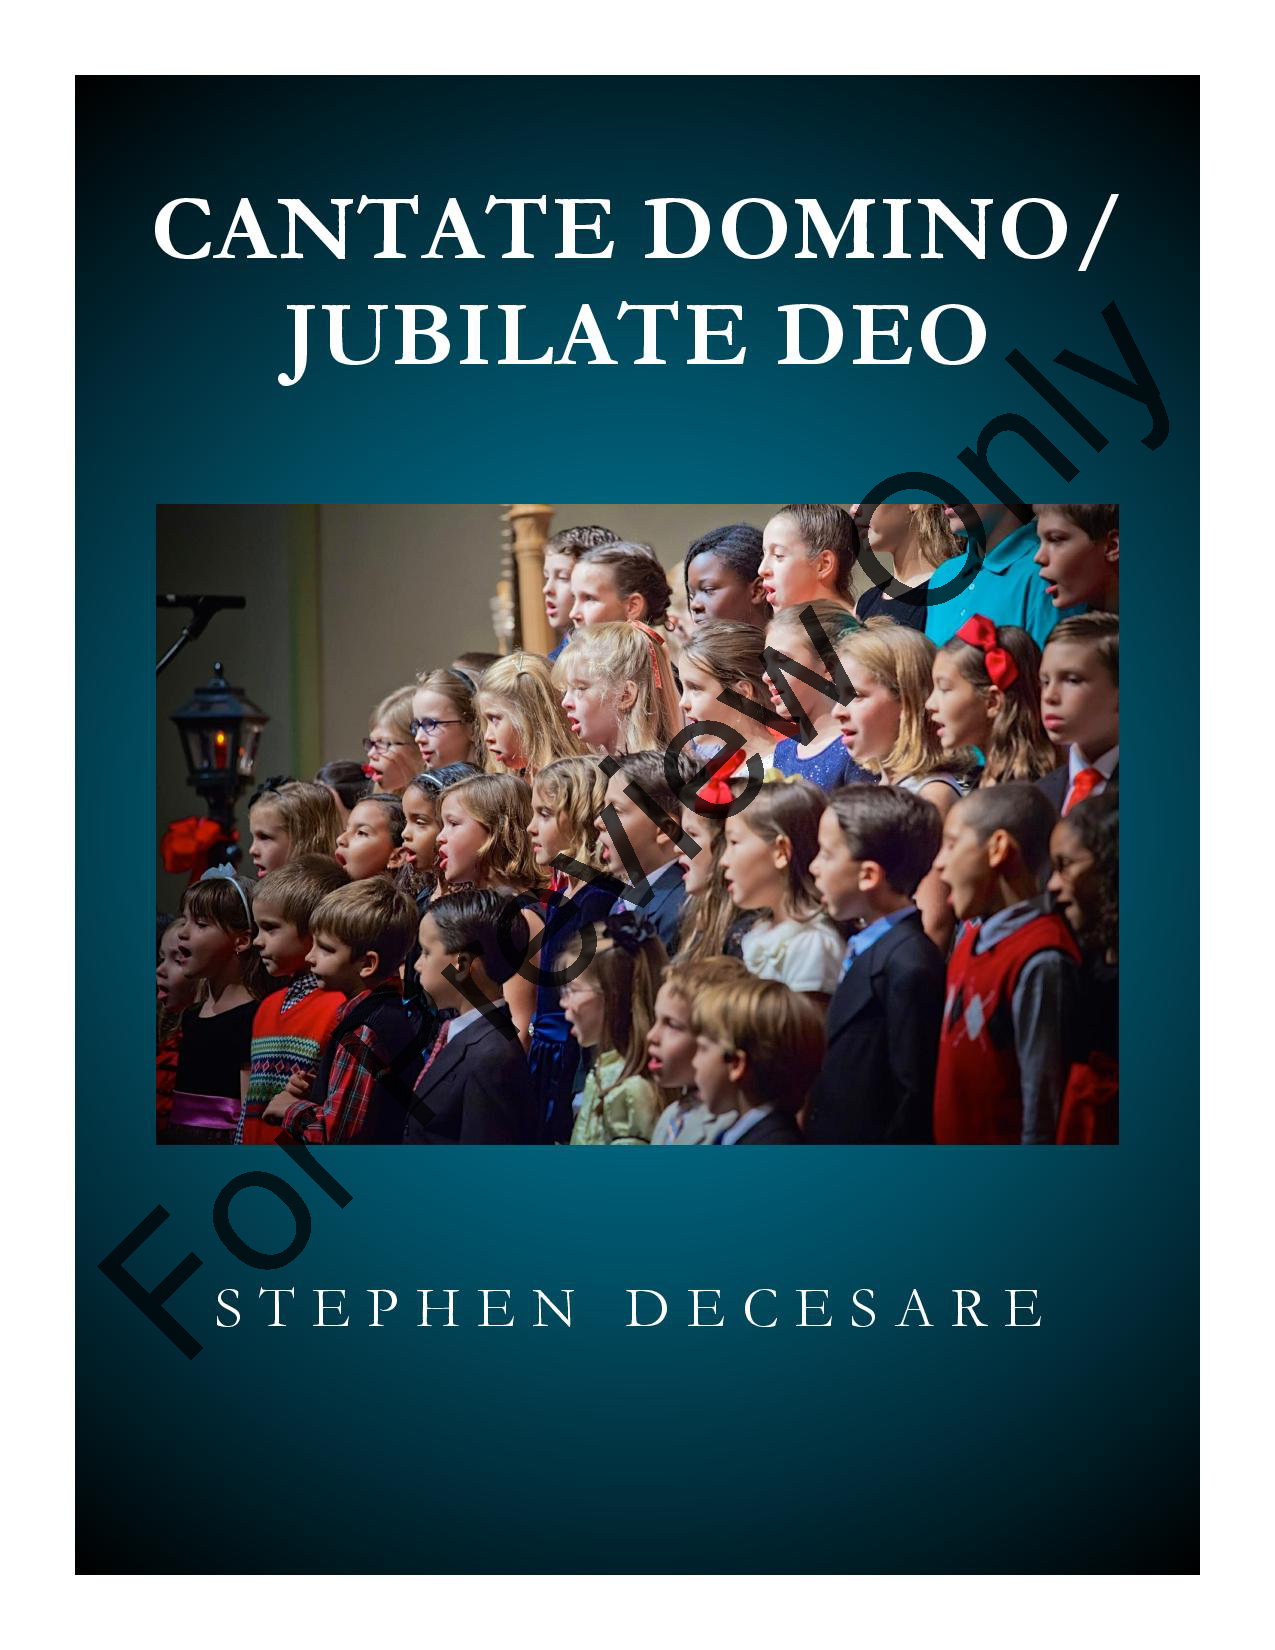 Cantate Domino / Jubilate Deo P.O.D.